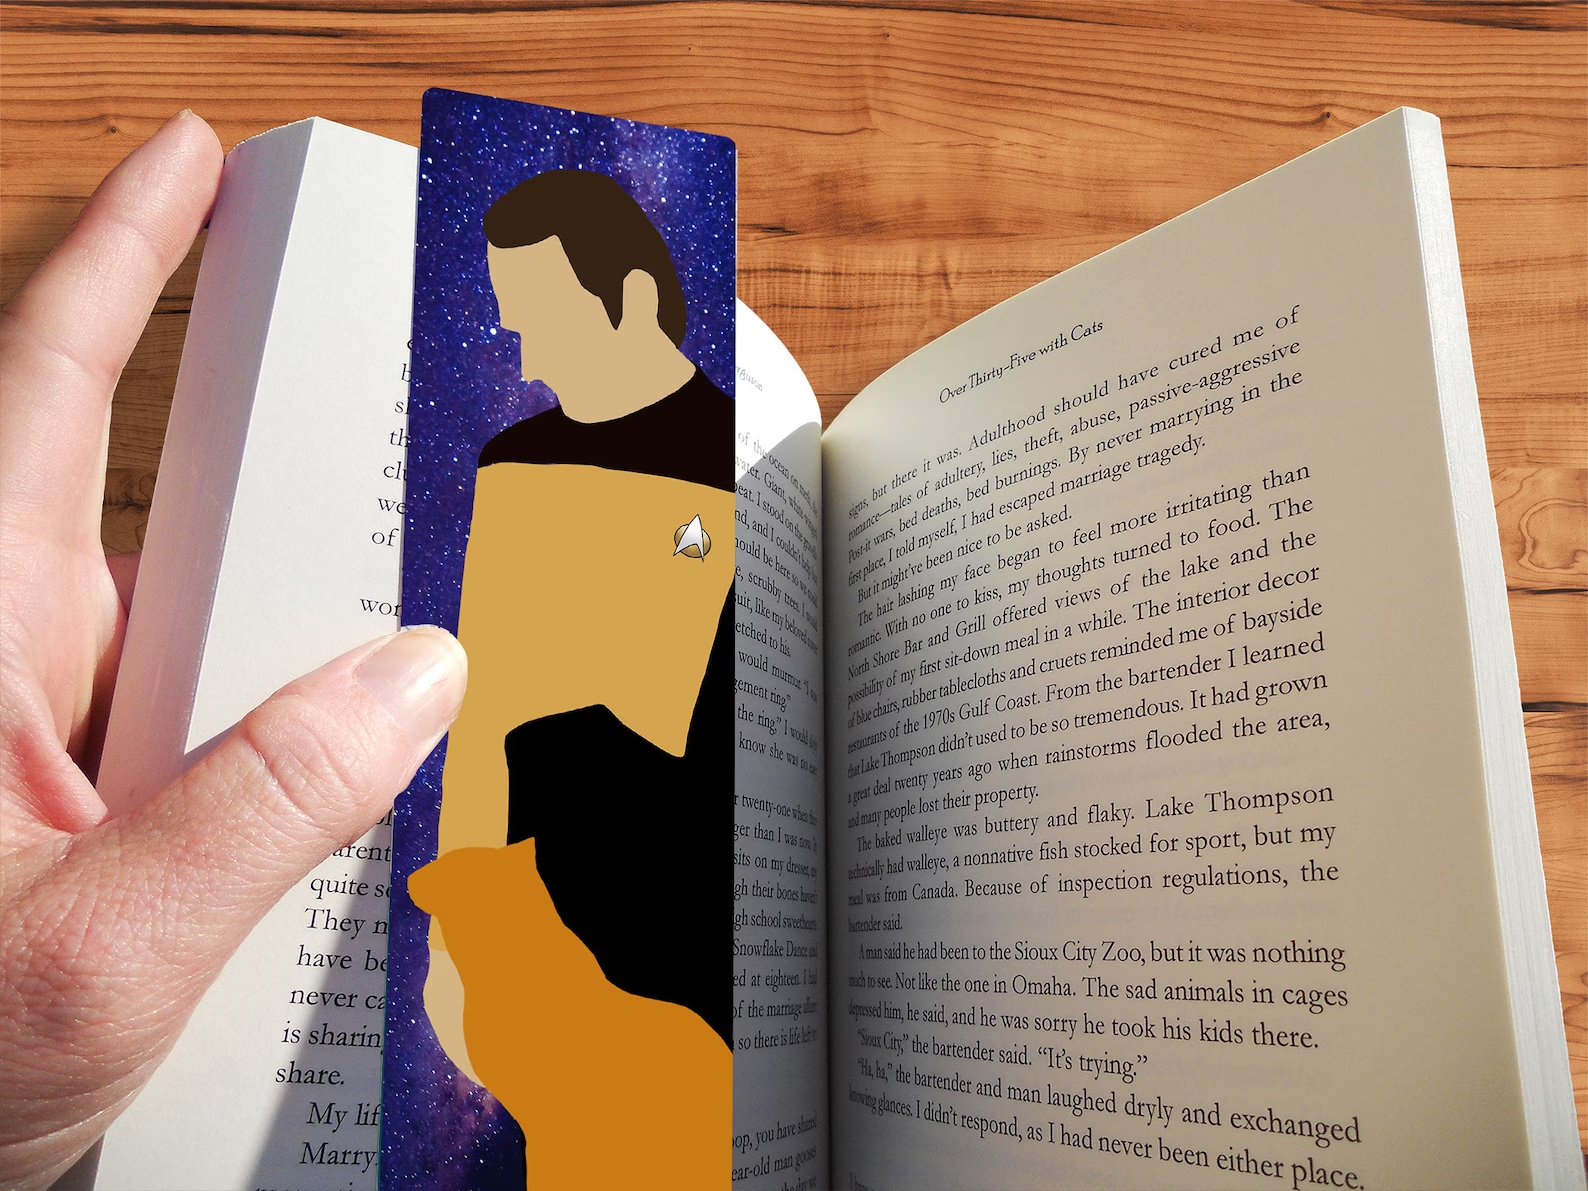 A minimalist bookmark inside a book showing silhouette art of Data from Star Trek, TNG series and an orange cat